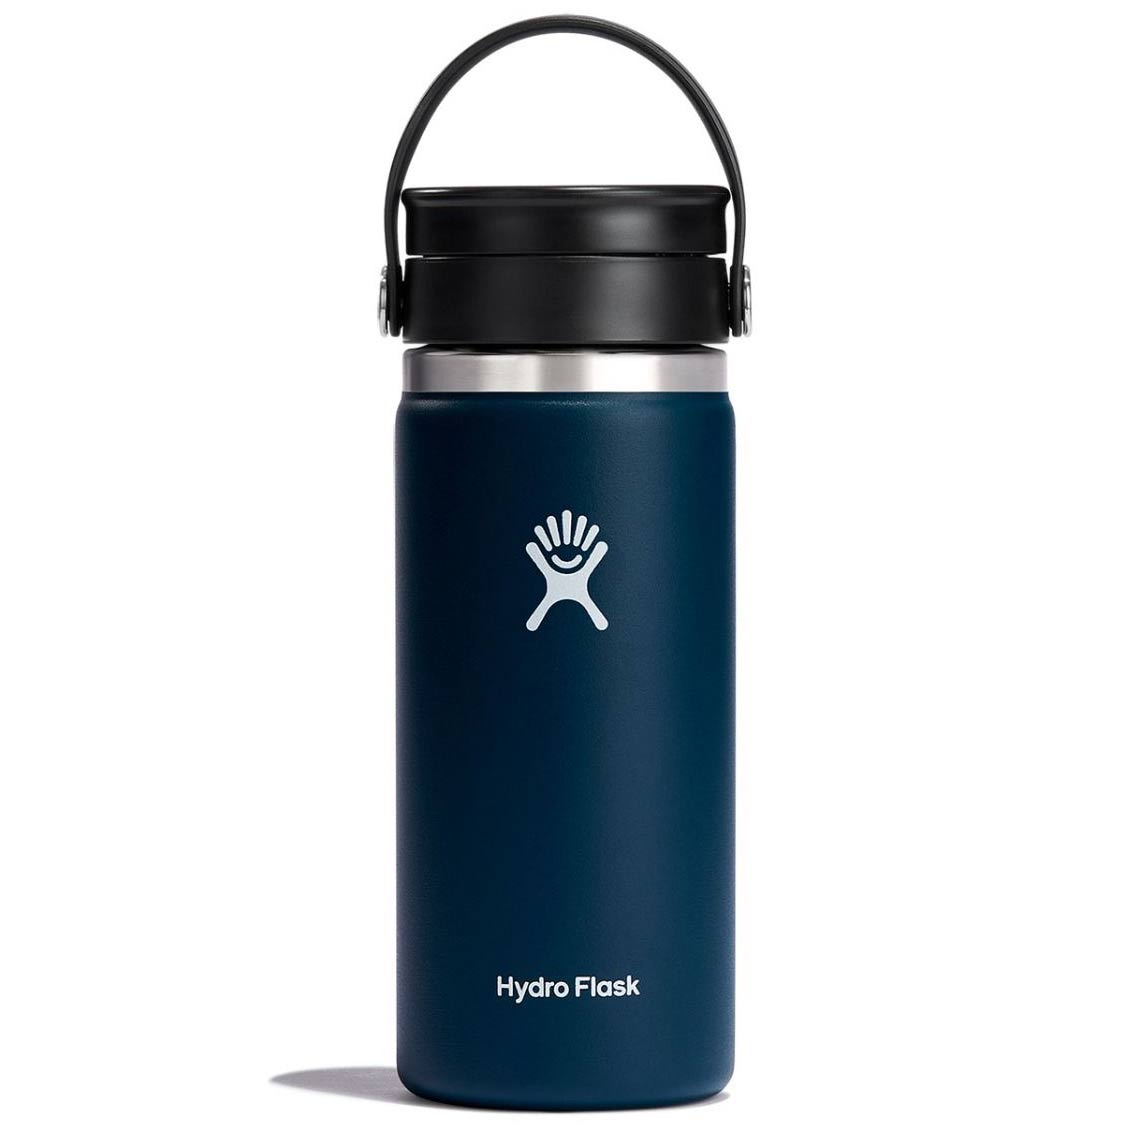 Picture of Hydro Flask 16 oz Wide Mouth Coffee Insulated Bottle + Flex Sip Lid - 473 ml - Indigo